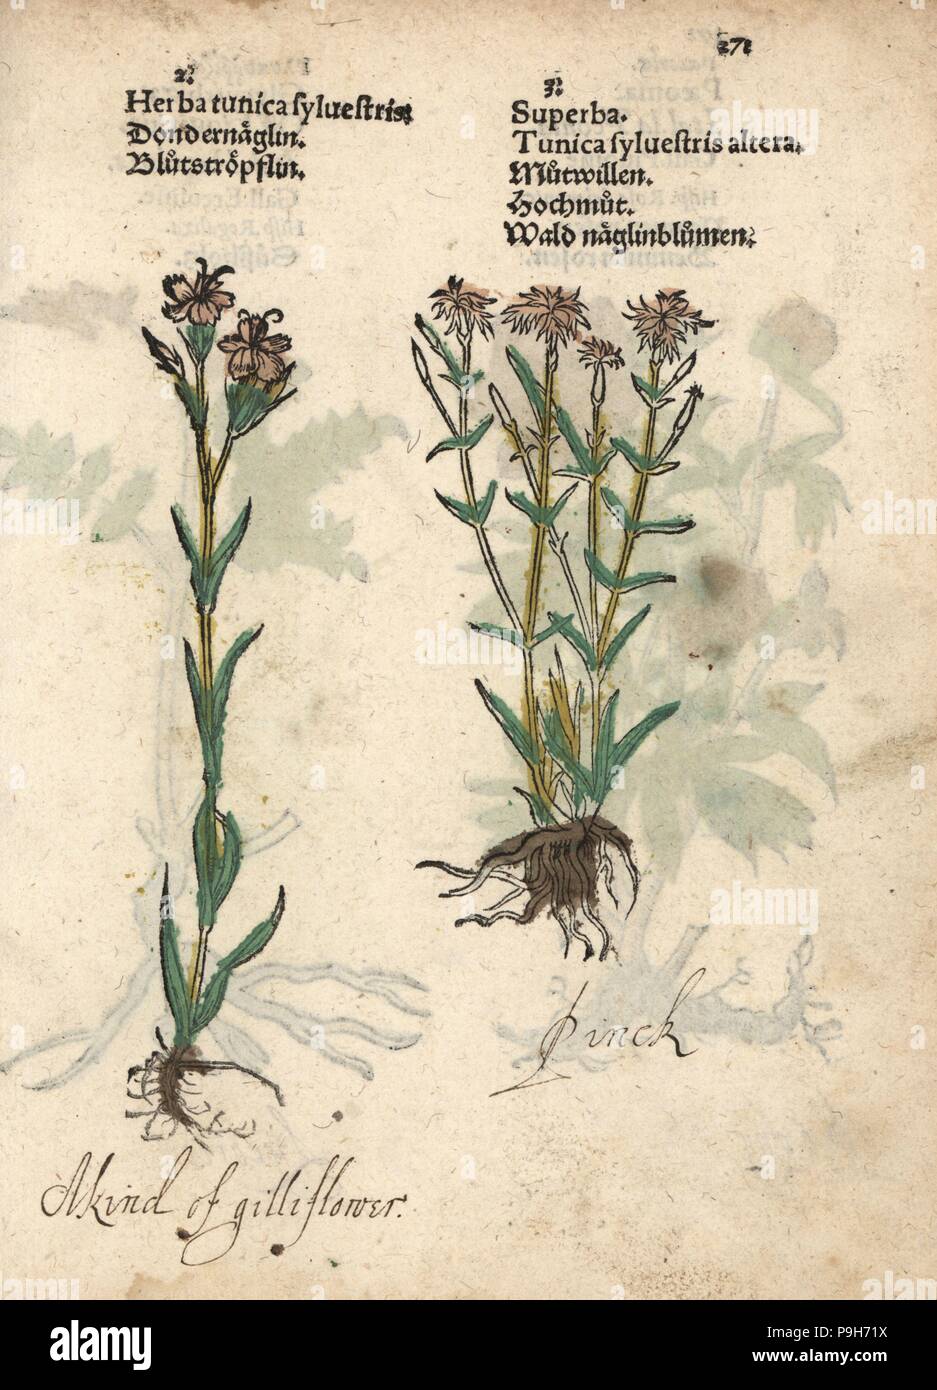 Dwarf pink carnations, Dianthus caryophyllus. Handcoloured woodblock engraving of a botanical illustration from Adam Lonicer's Krauterbuch, or Herbal, Frankfurt, 1557. This from a 17th century pirate edition or atlas of illustrations only, with captions in Latin, Greek, French, Italian, German, and in English manuscript. Stock Photo